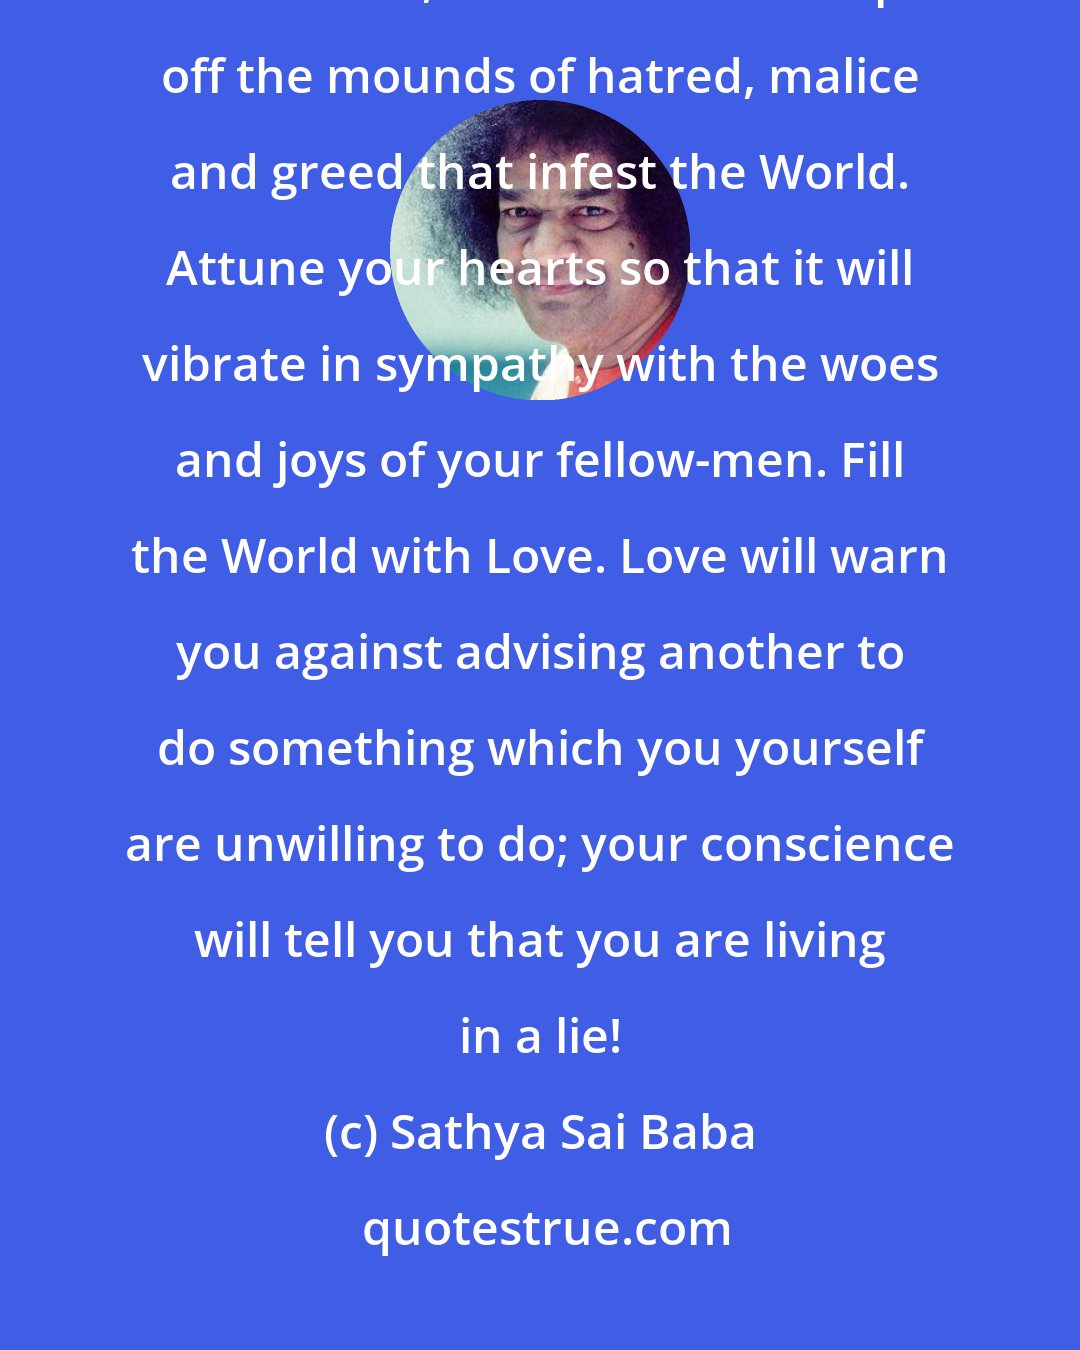 Sathya Sai Baba: If a wave of service sweeps over the land, catching everyone in its enthusiasm, it will be able to wipe off the mounds of hatred, malice and greed that infest the World. Attune your hearts so that it will vibrate in sympathy with the woes and joys of your fellow-men. Fill the World with Love. Love will warn you against advising another to do something which you yourself are unwilling to do; your conscience will tell you that you are living in a lie!